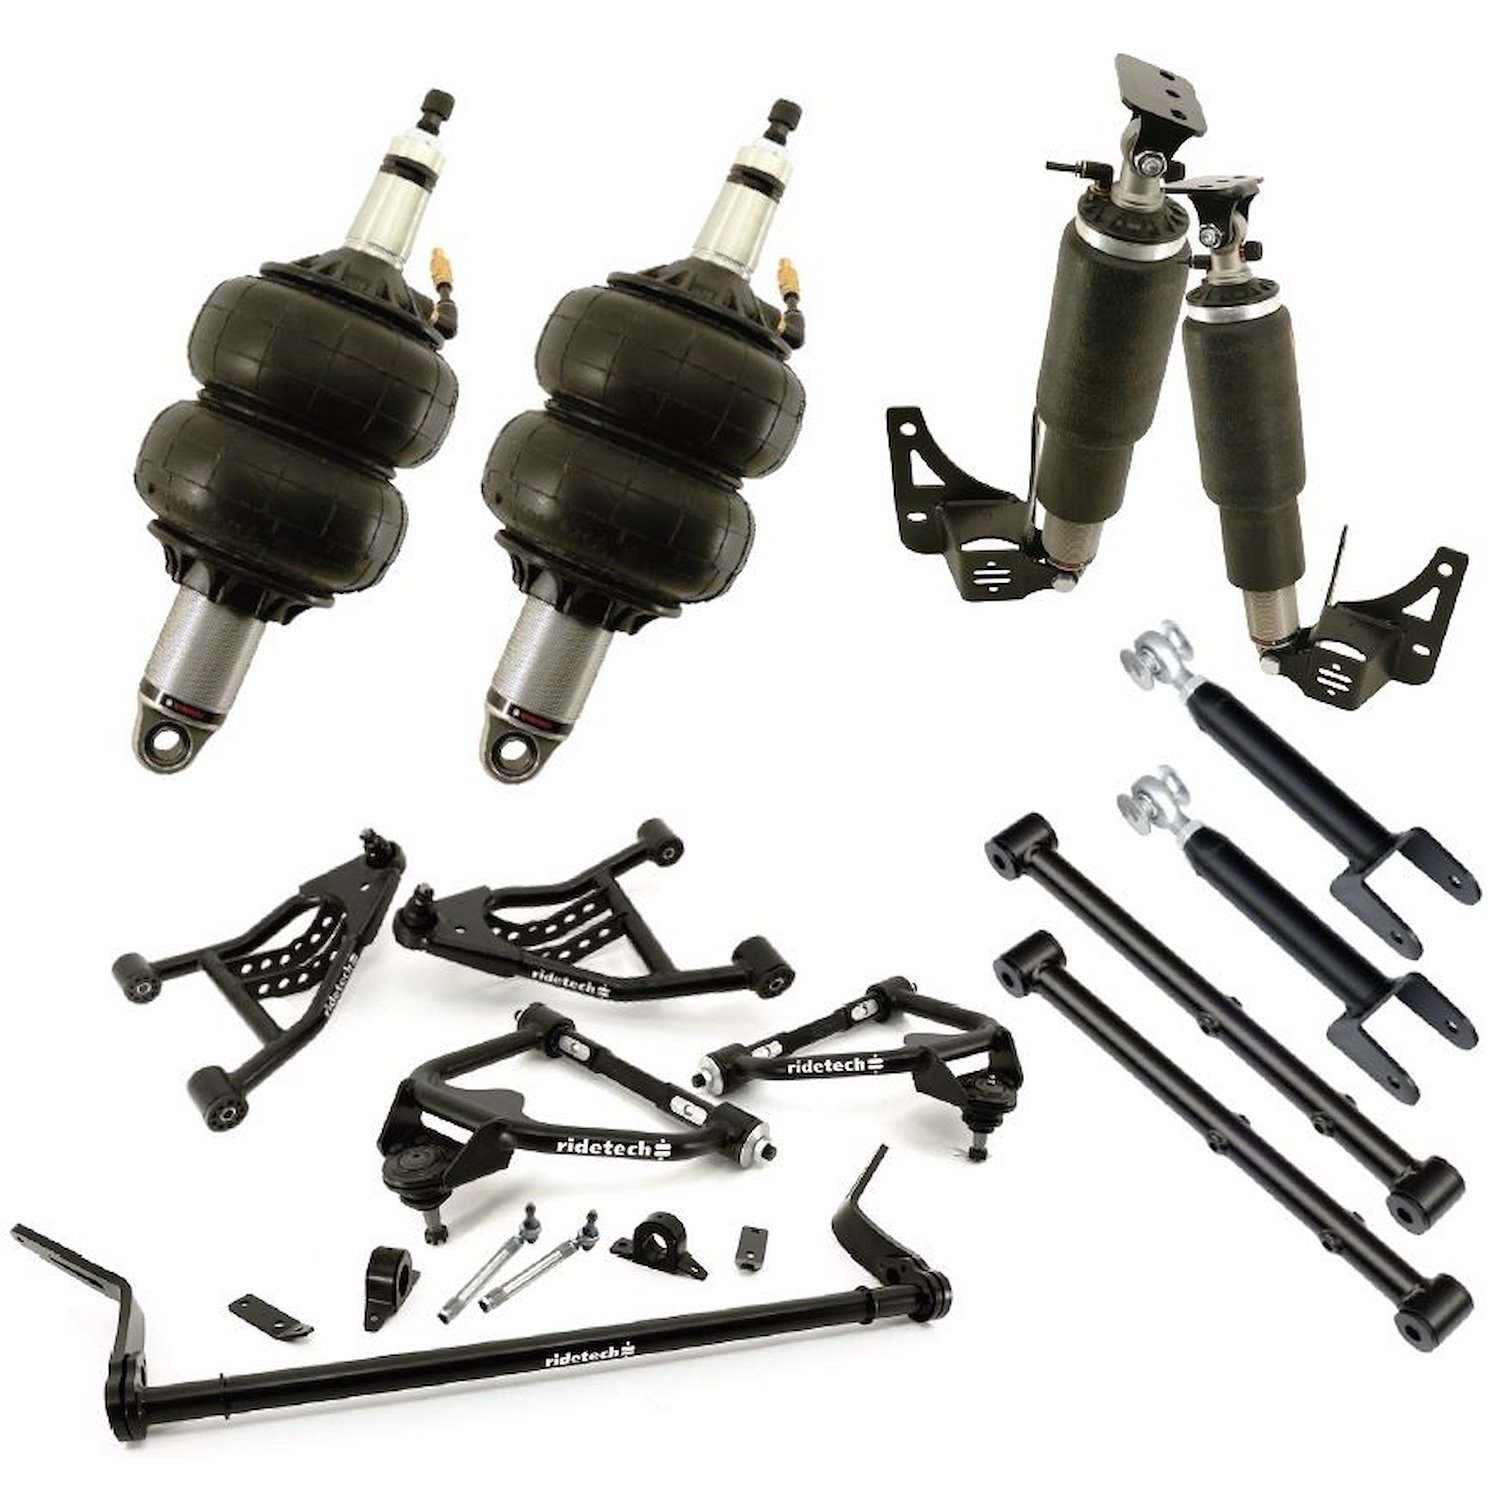 Complete Air Suspension System for 1978-1988 GM G-Body